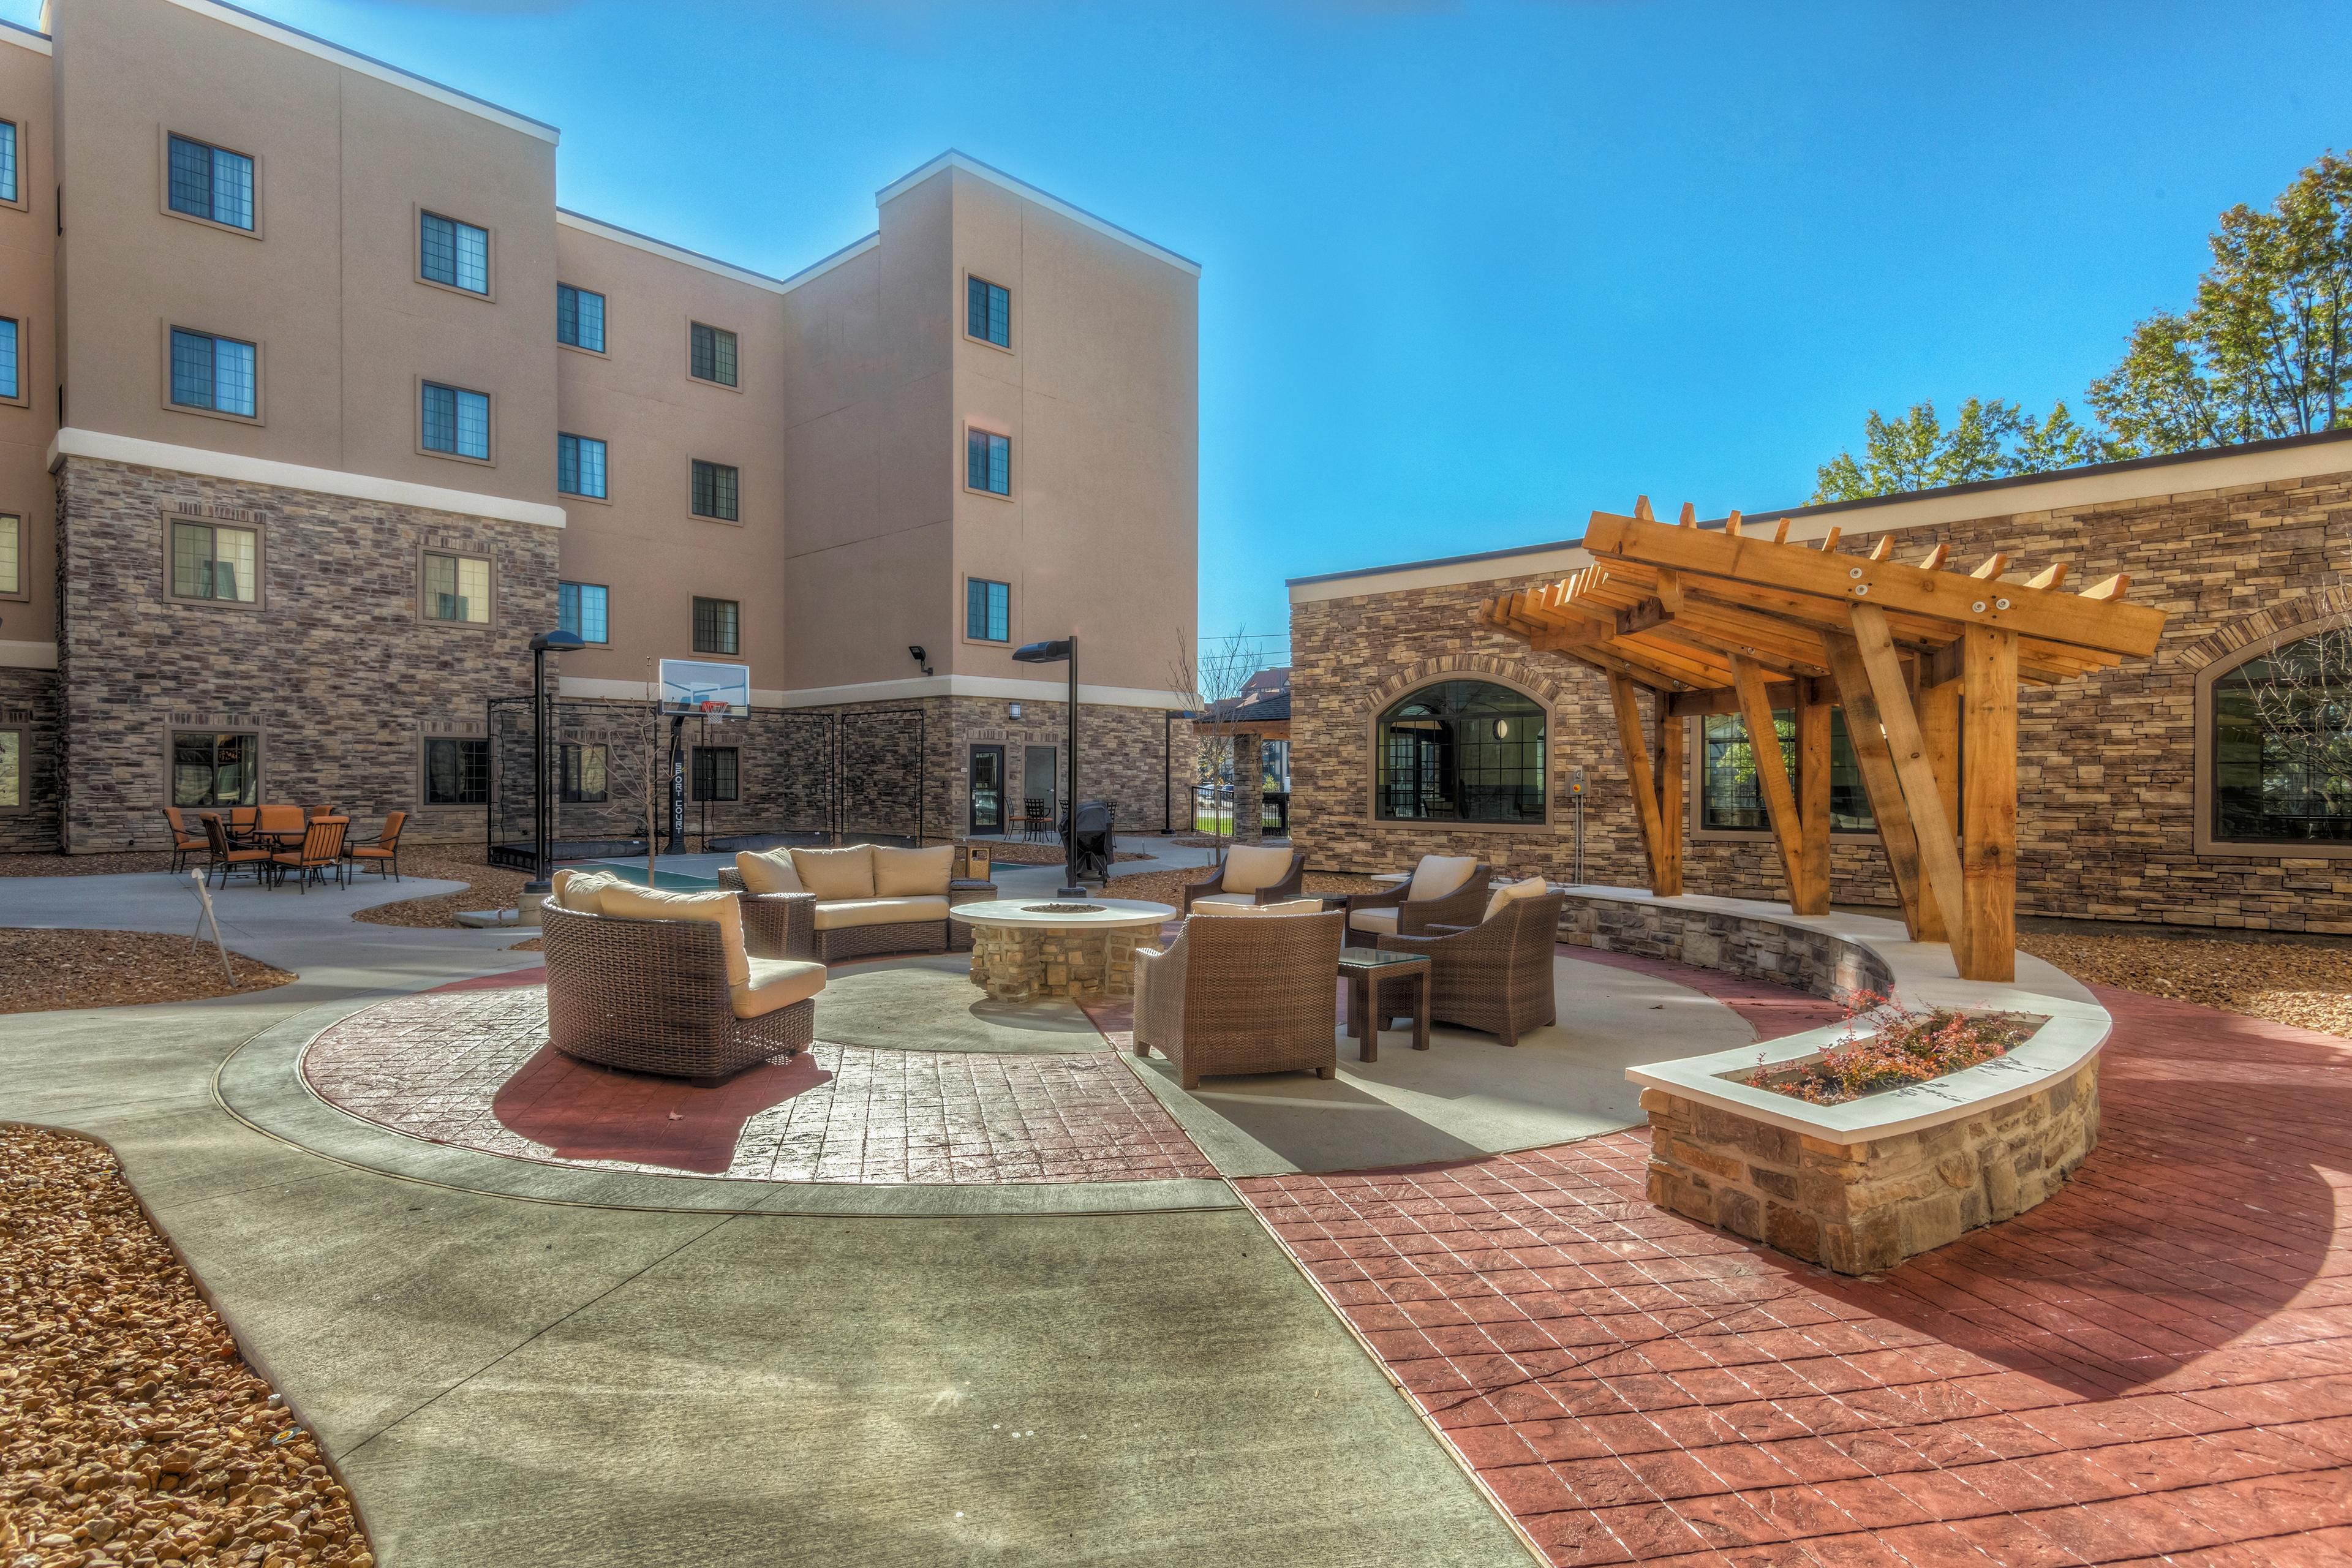 Take a break in our courtyard area, open to all guests. Offerings in this area include our basketball court, fire pit, and a guest accessible grill! 